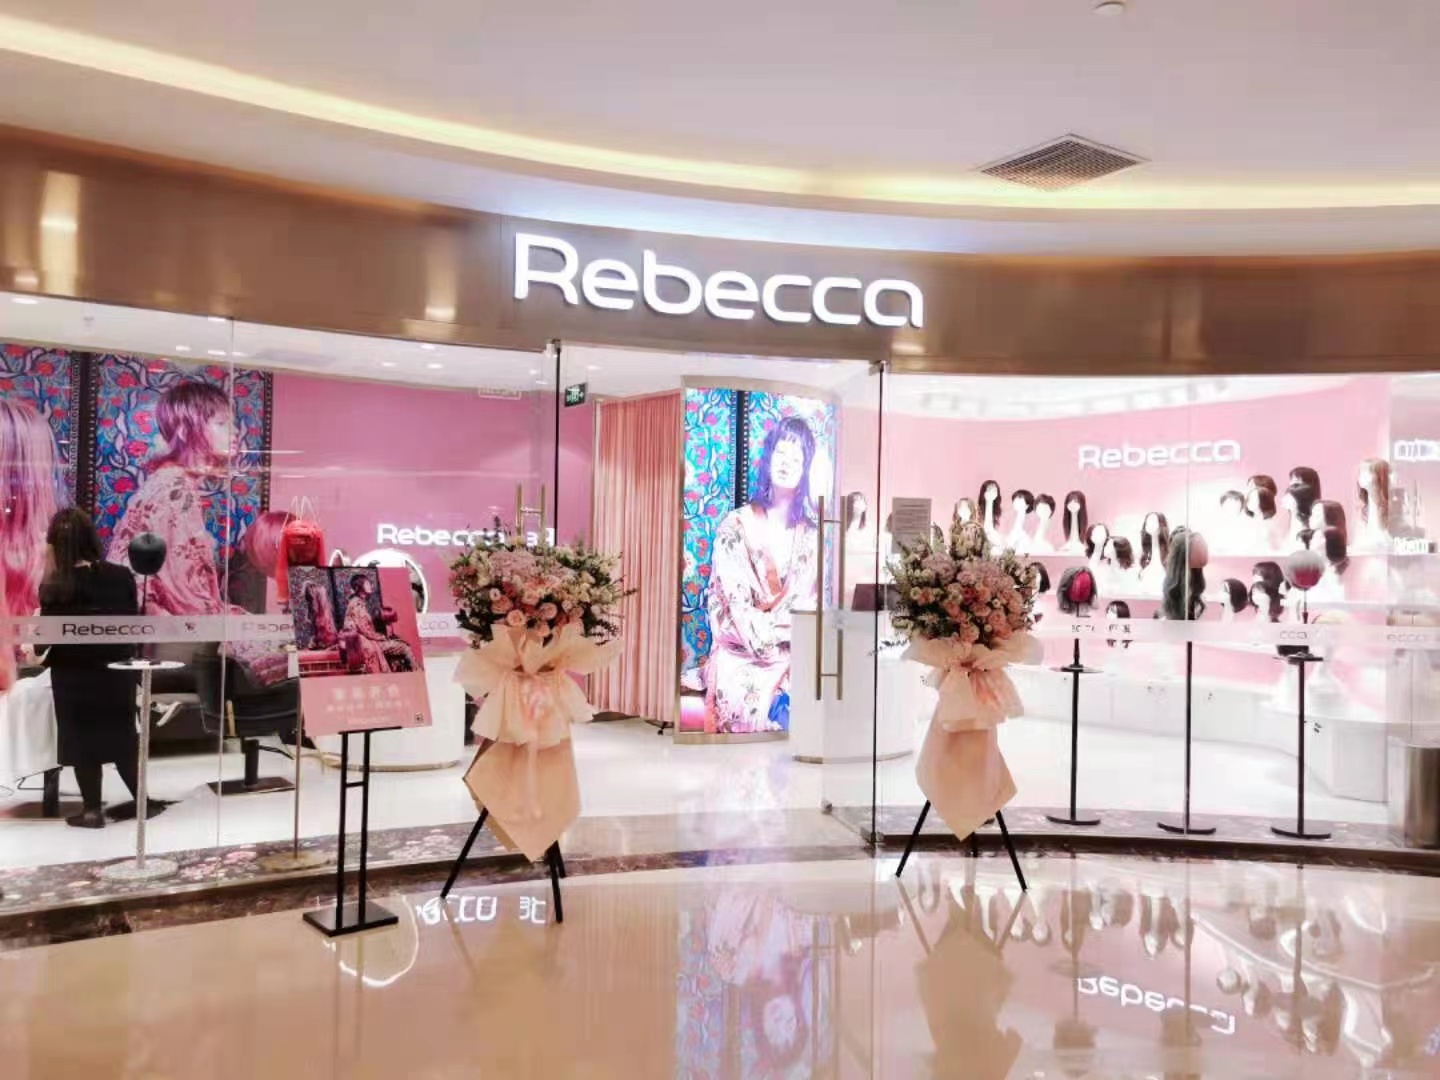 Cross border information revenue of 1.05 billion yuan in 9 months, wig giant Rebecca continues to make efforts online